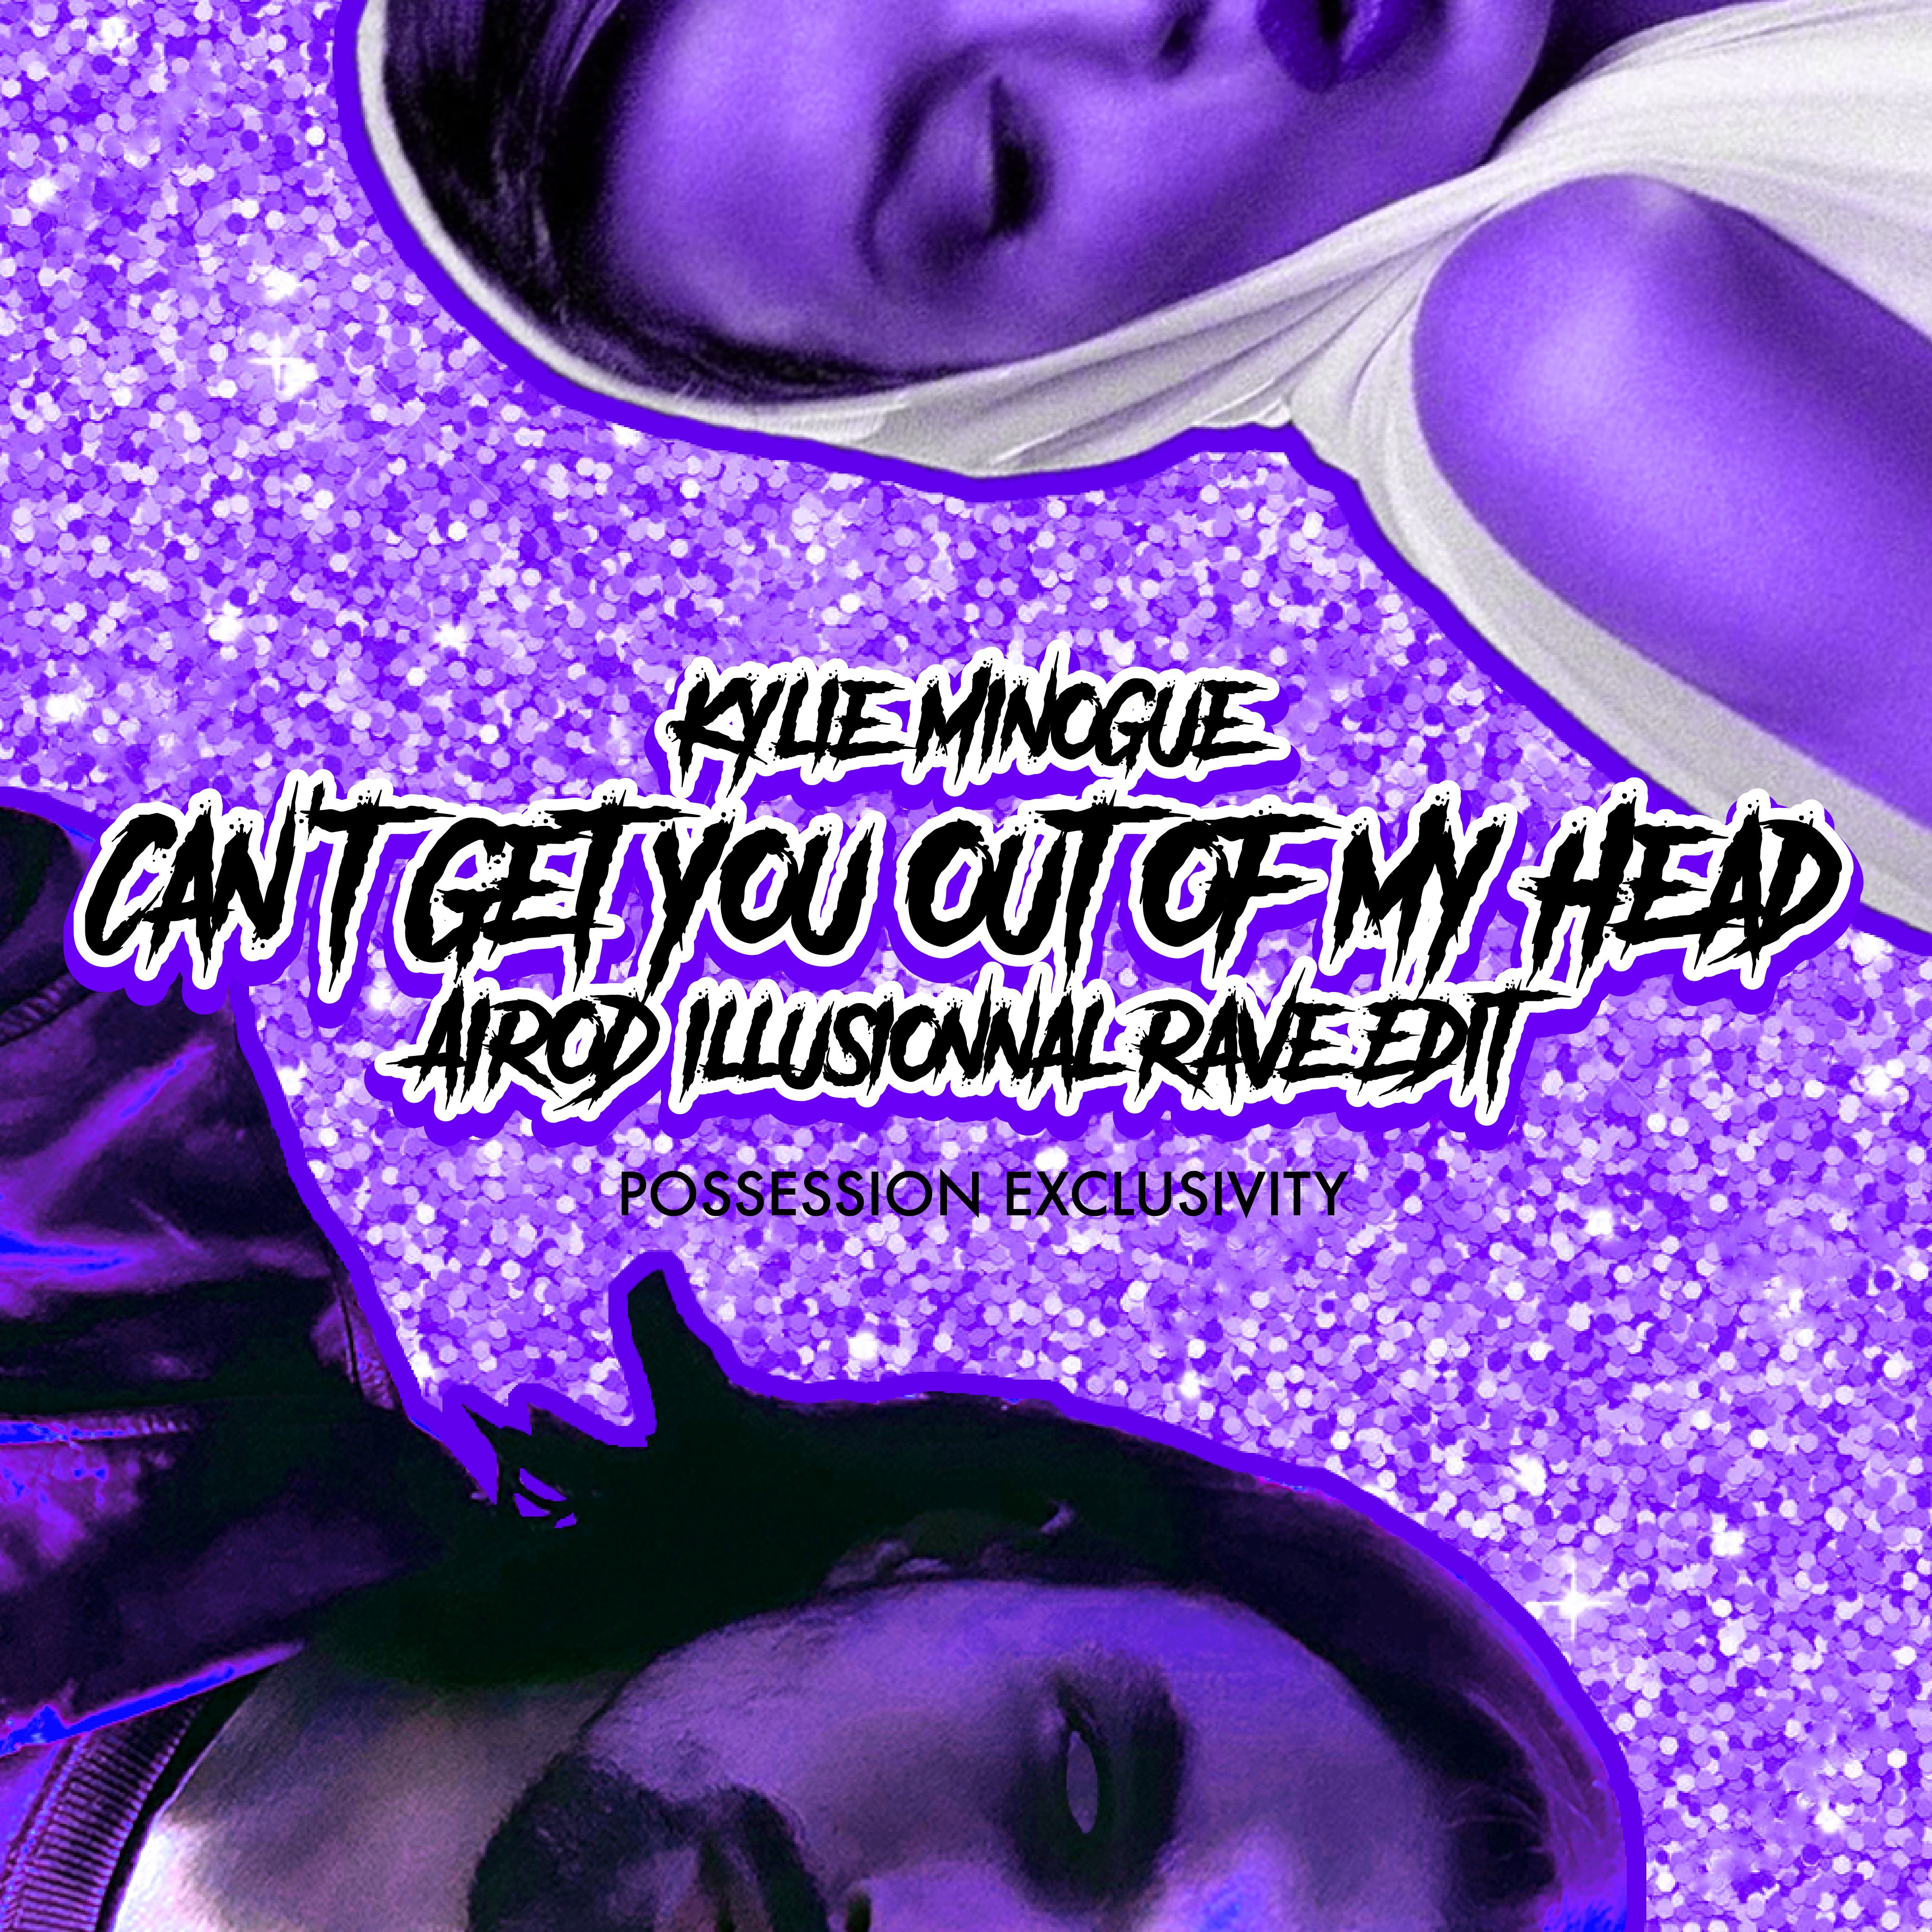 Kylie Minogue can`t get you out. Kylie Minogue tears on my Pillow. Kylie Minogue can't get you out of my head. Hard Techno Rave. Кэт дженис dance you outta my